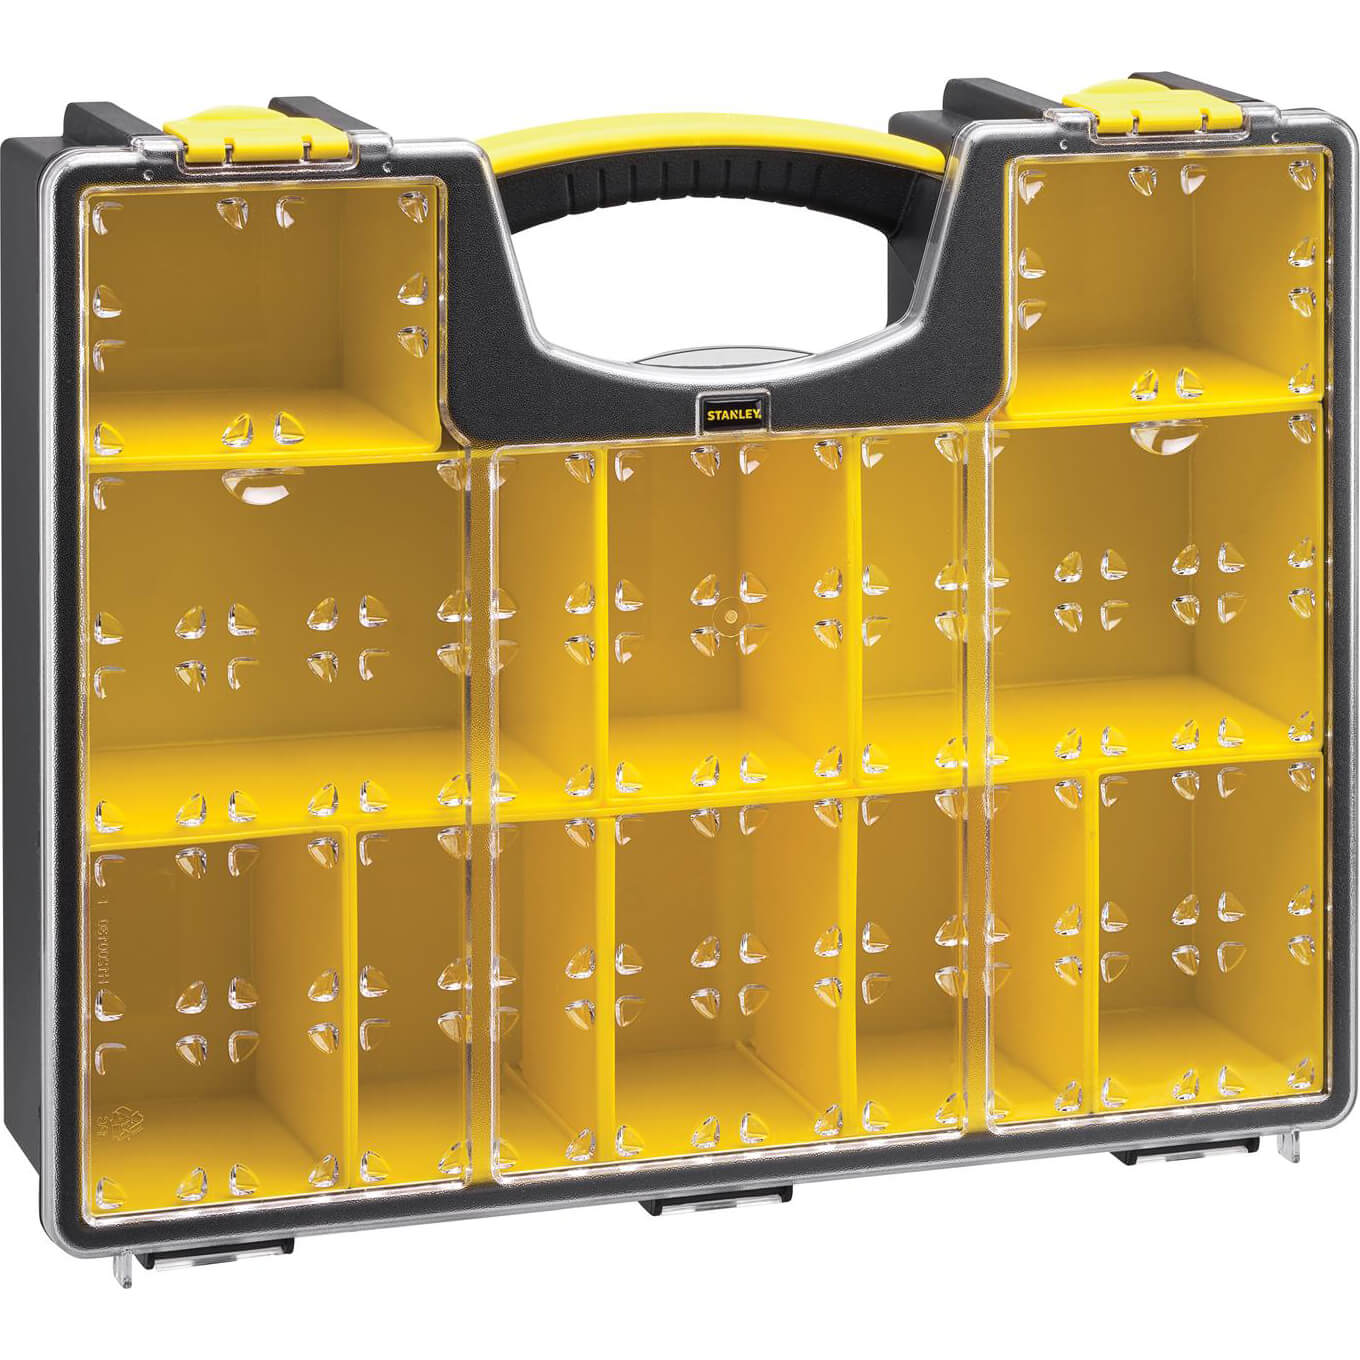 Image of Stanley Professional 8 Compartment Deep Organiser Box